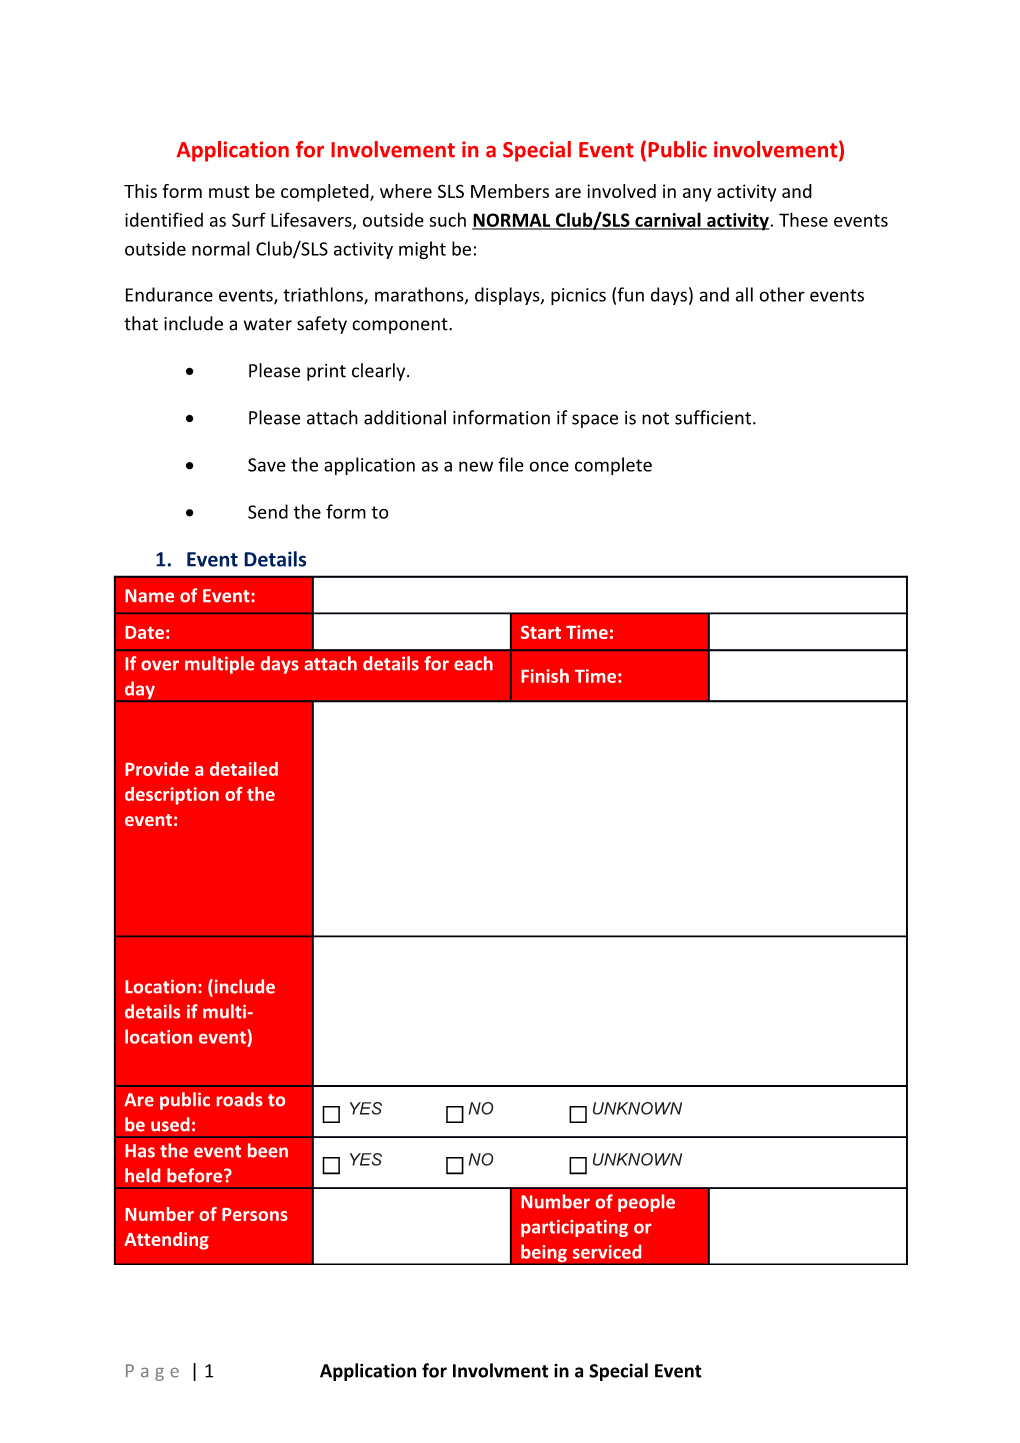 Application for Involvement in a Special Event (Public Involvement)